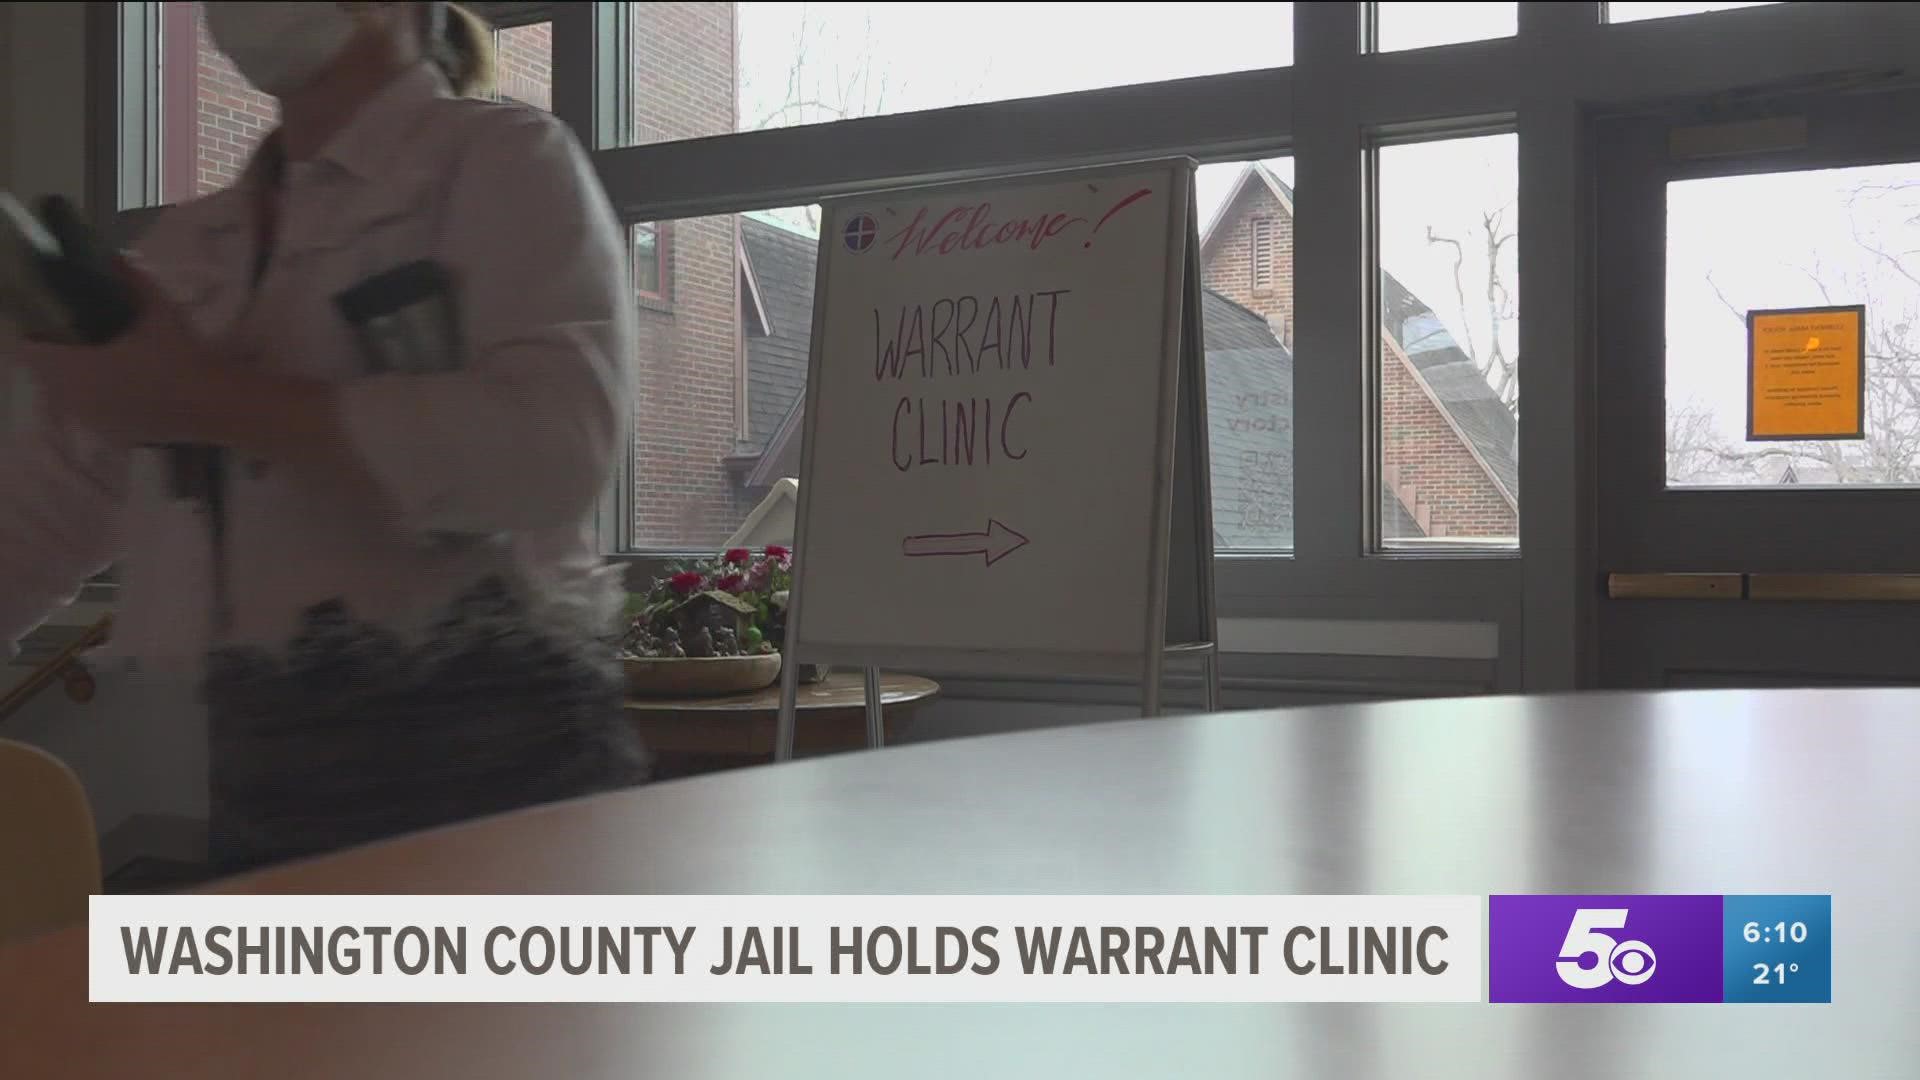 The warrant clinic held in Fayetteville provided resources for those who have outstanding warrants.